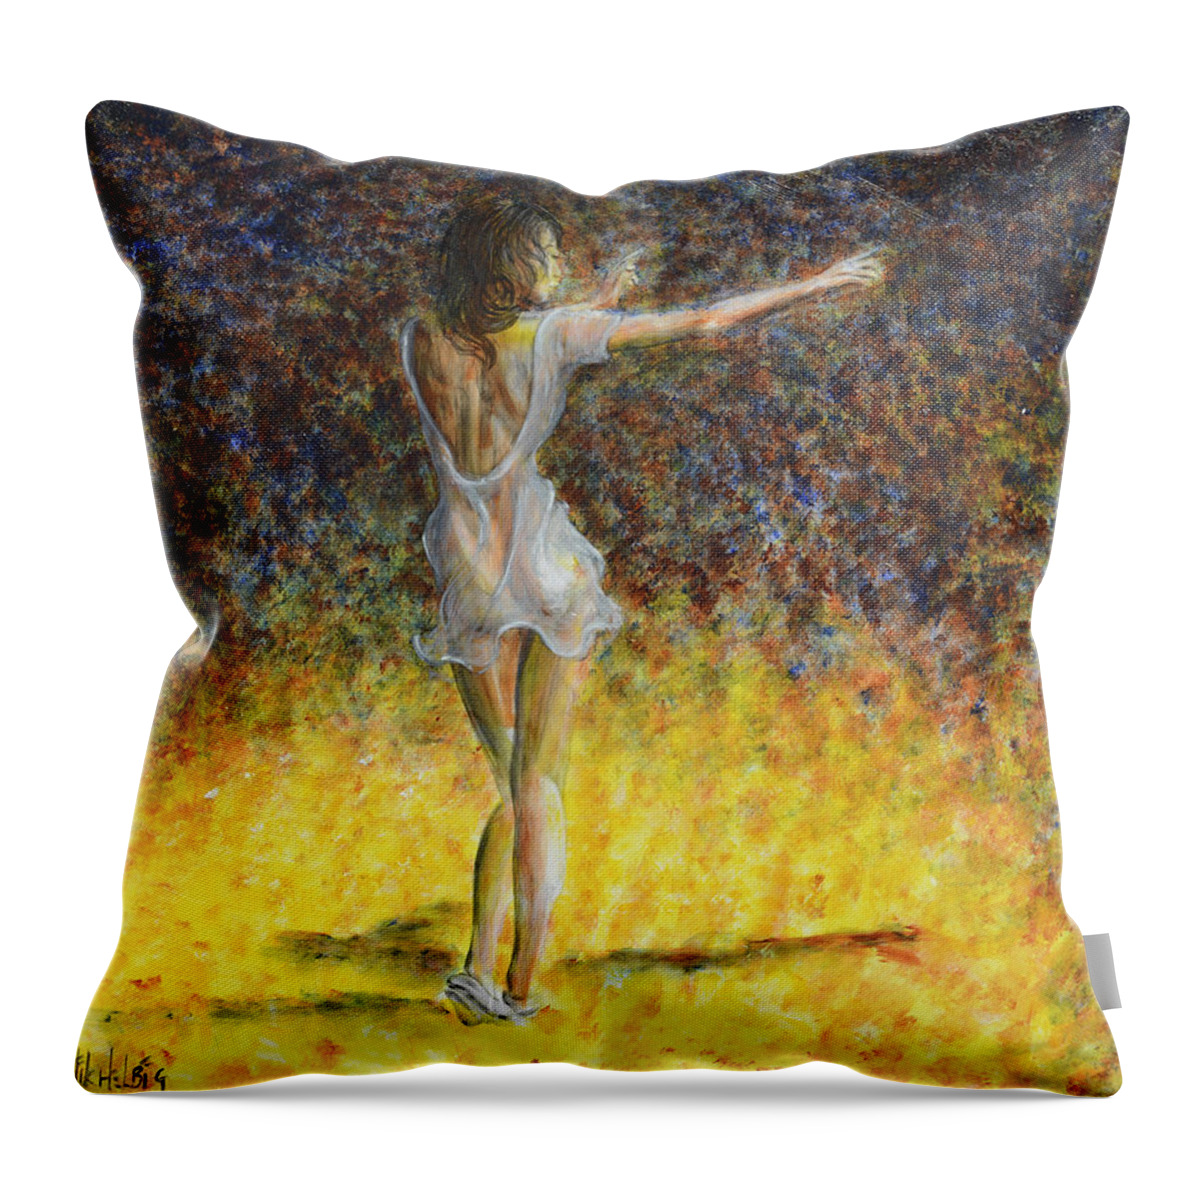 Dancer Throw Pillow featuring the painting Dancer Spotlight by Nik Helbig